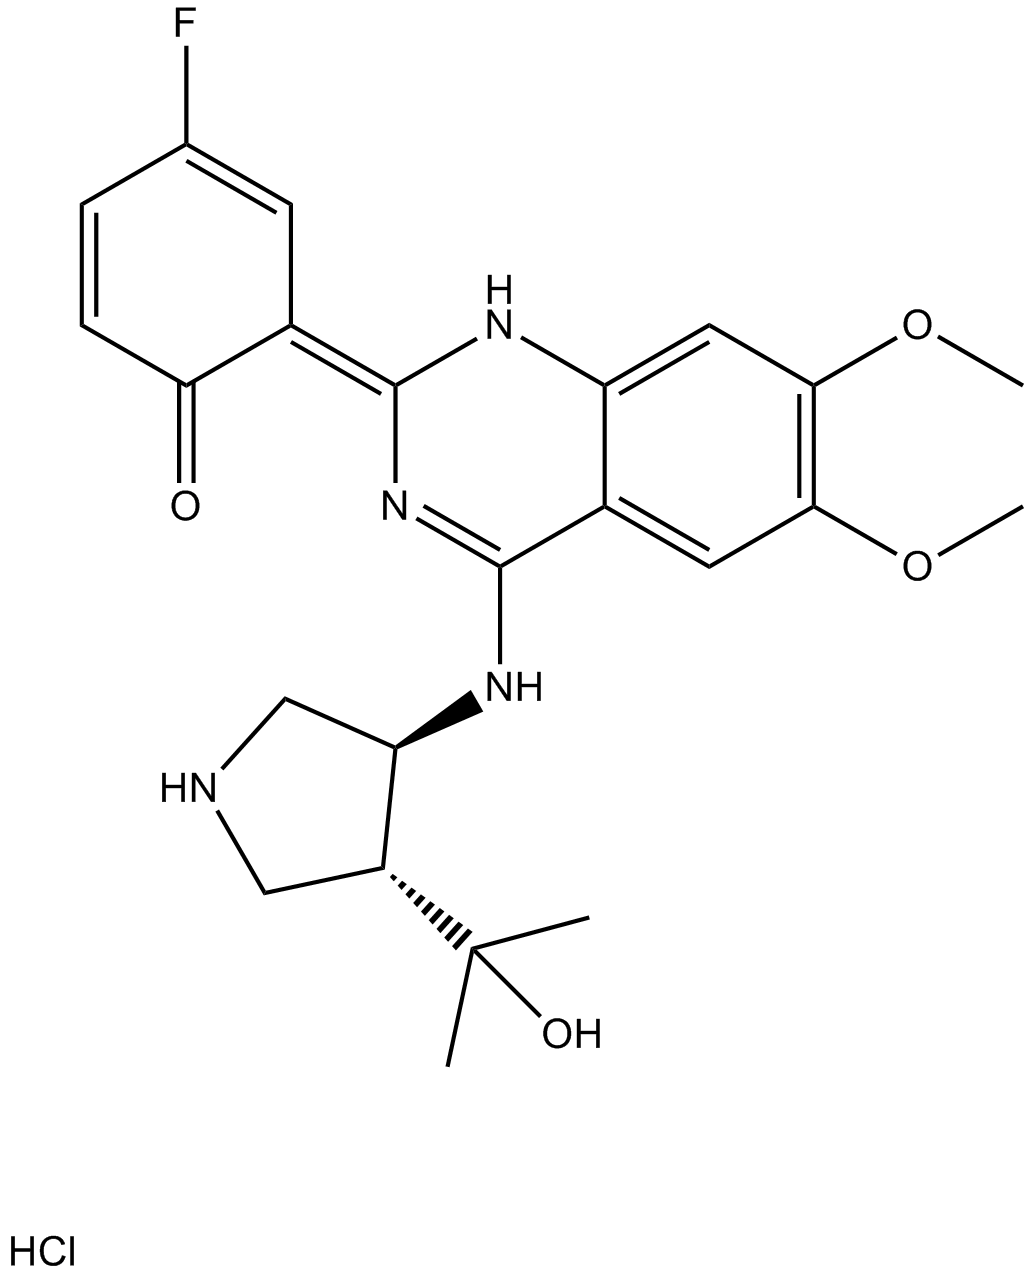 CCT241533 hydrochloride  Chemical Structure